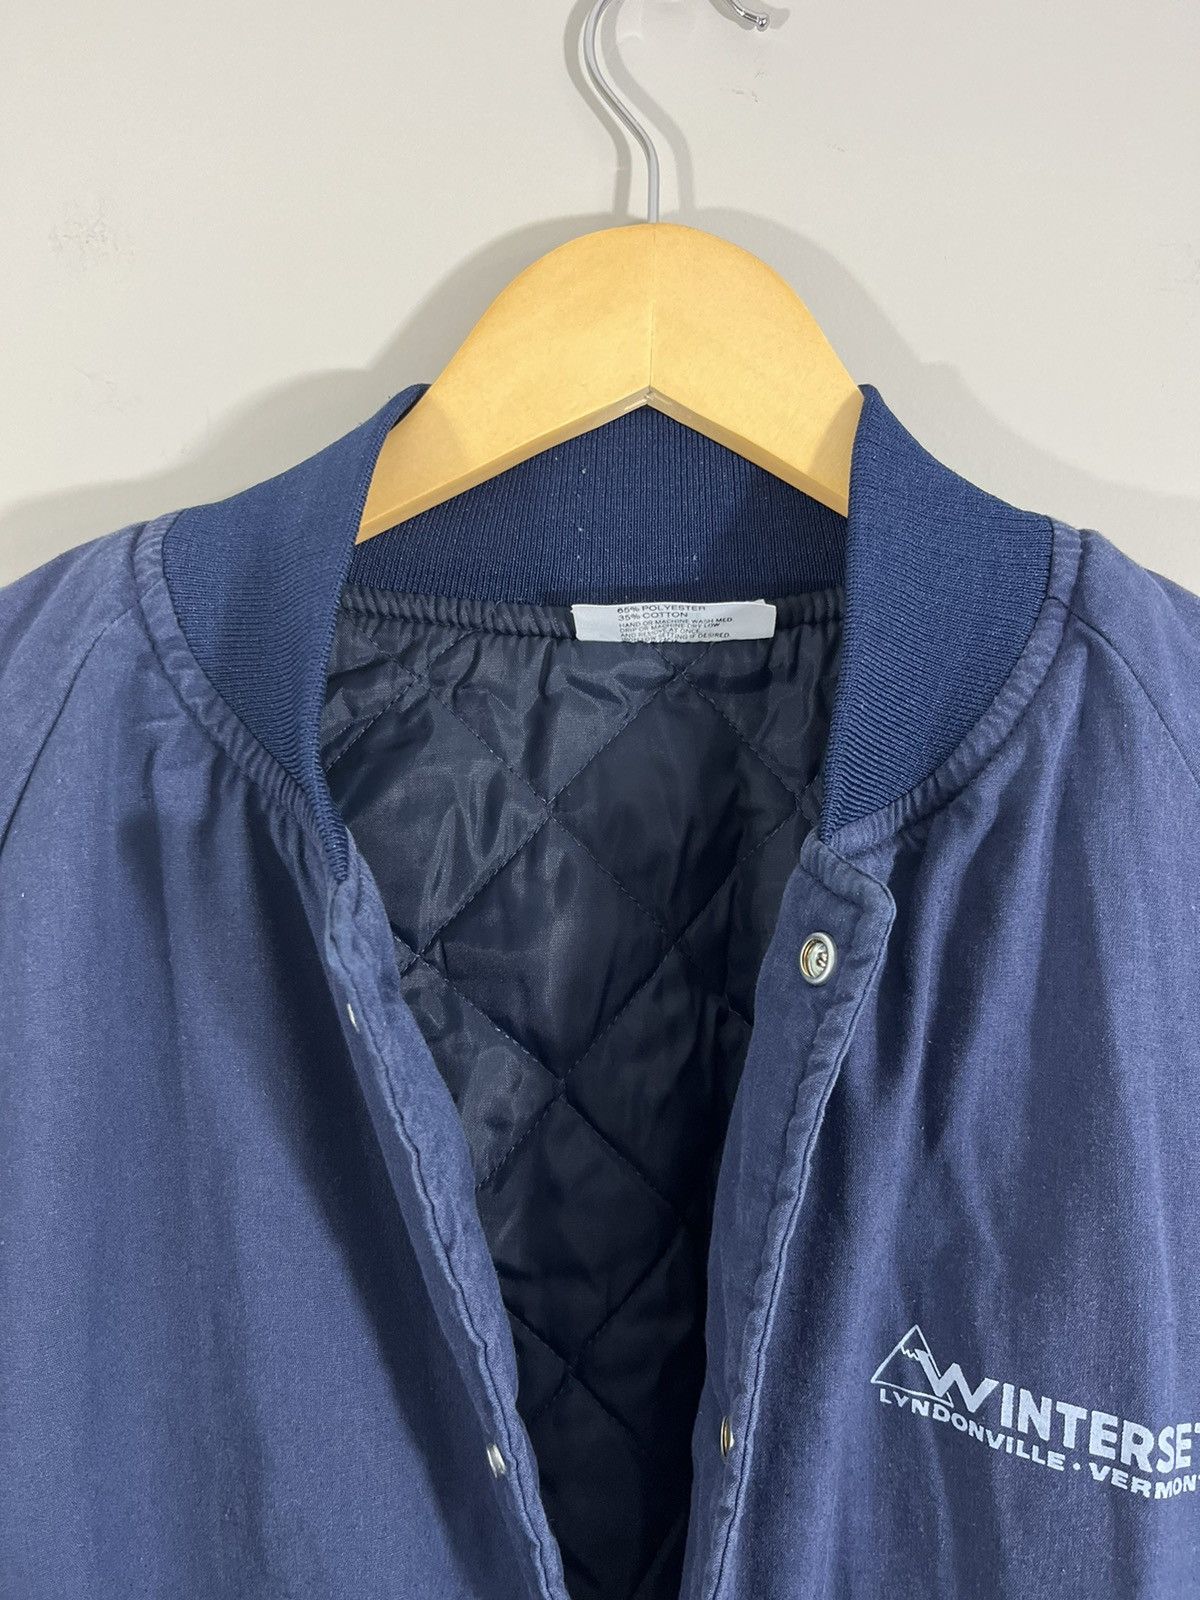 Vintage Vintage Sun Faded Navy Blue Boxy Quilted Bomber Jacket Size US L / EU 52-54 / 3 - 5 Thumbnail